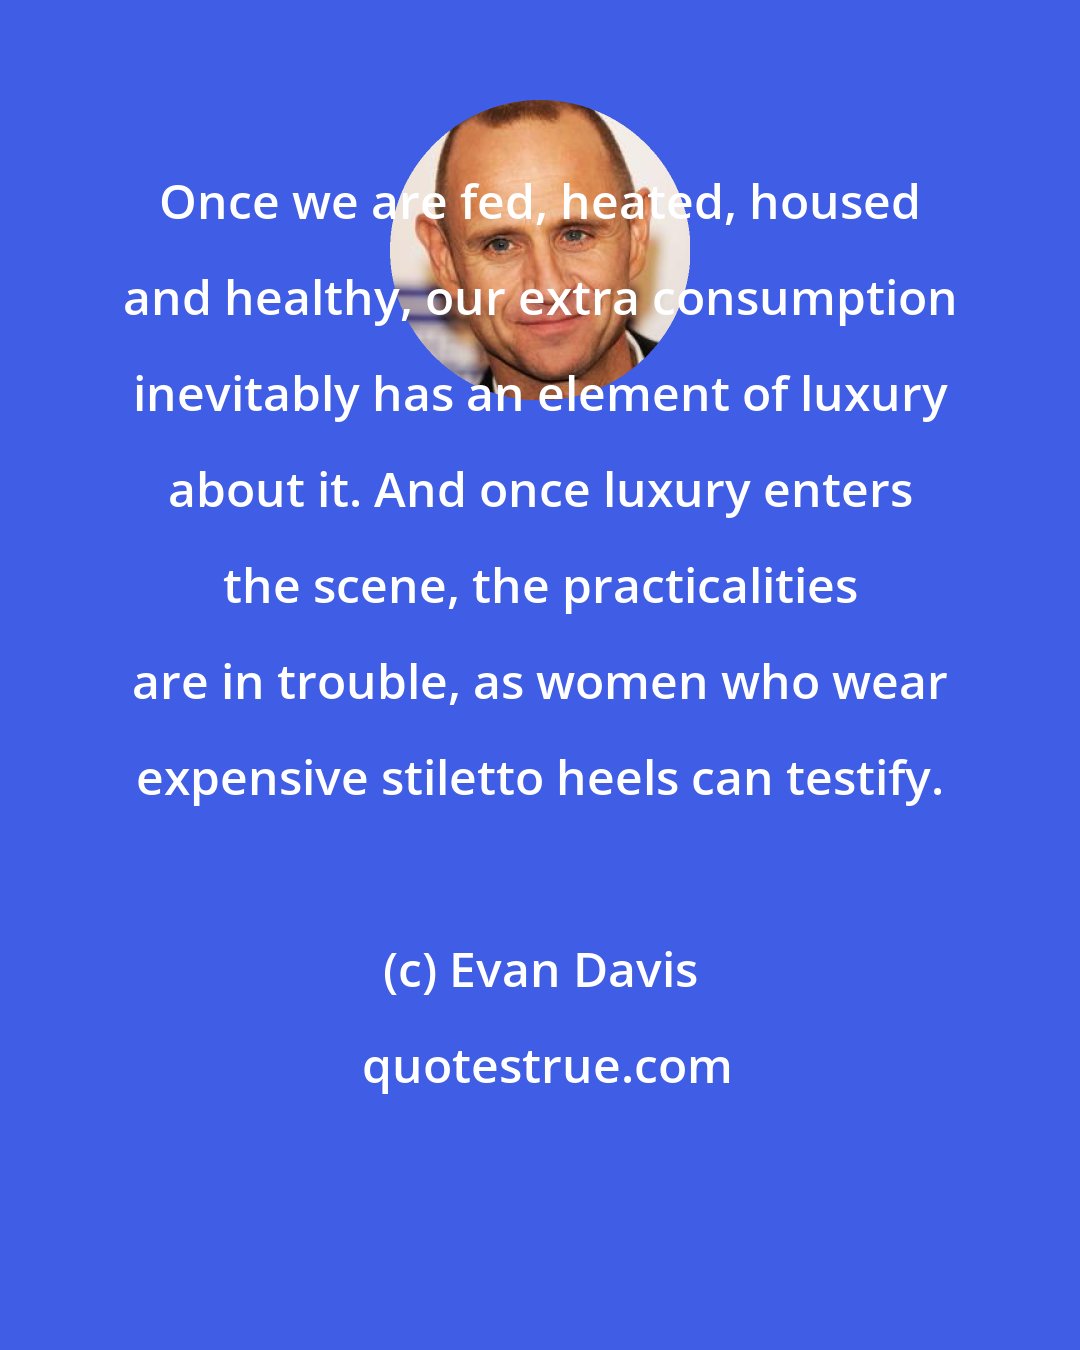 Evan Davis: Once we are fed, heated, housed and healthy, our extra consumption inevitably has an element of luxury about it. And once luxury enters the scene, the practicalities are in trouble, as women who wear expensive stiletto heels can testify.